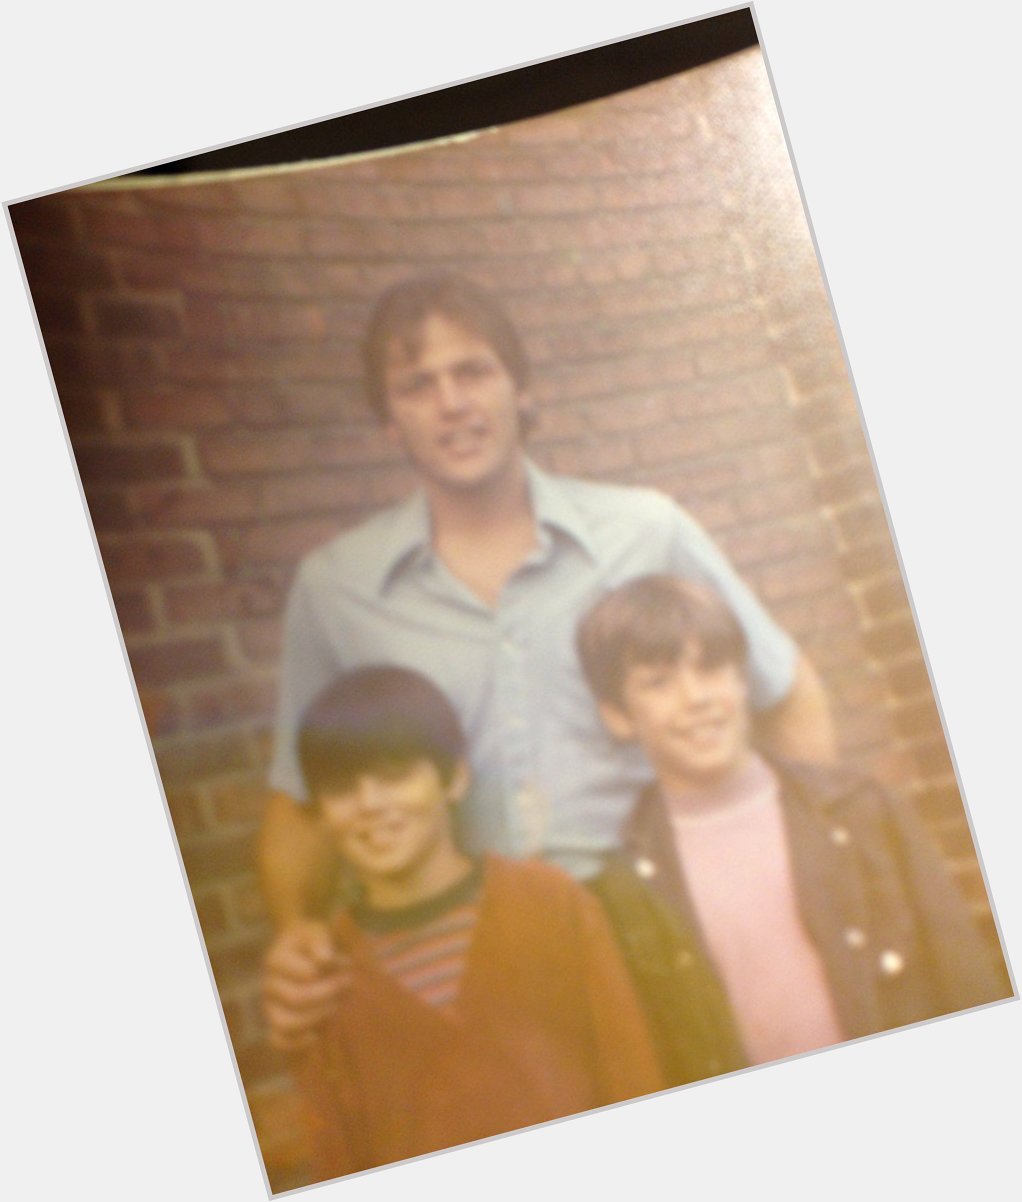 Happy Birthday Carlton Fisk. Yup thats me a long time ago hanging with the big guy 